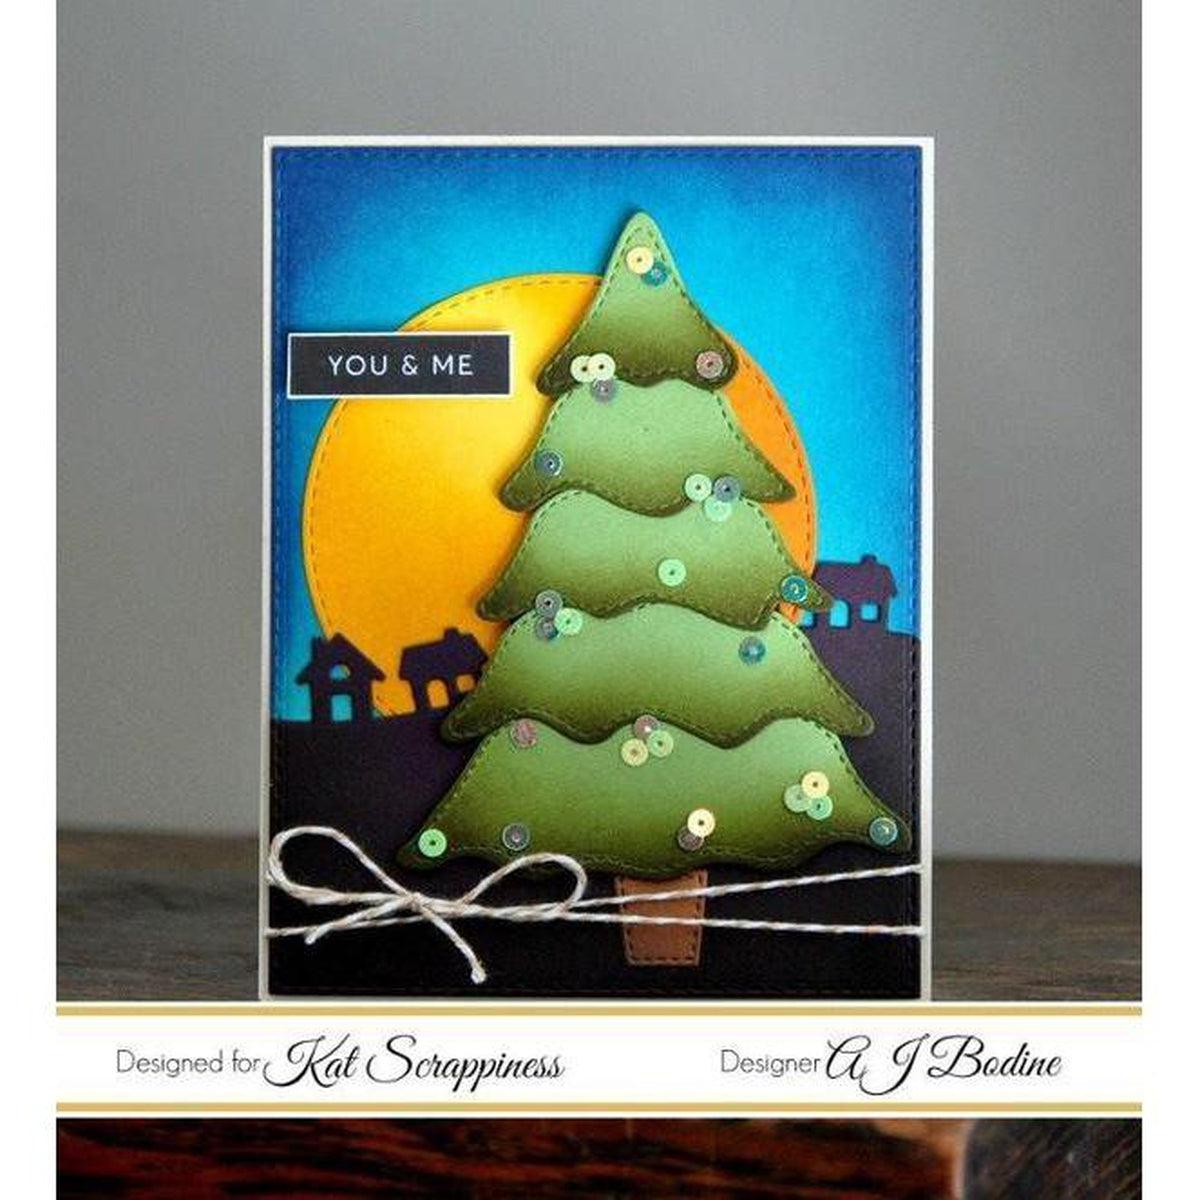 Stitched &amp; Layered Christmas Tree Die by Kat Scrappiness - Kat Scrappiness